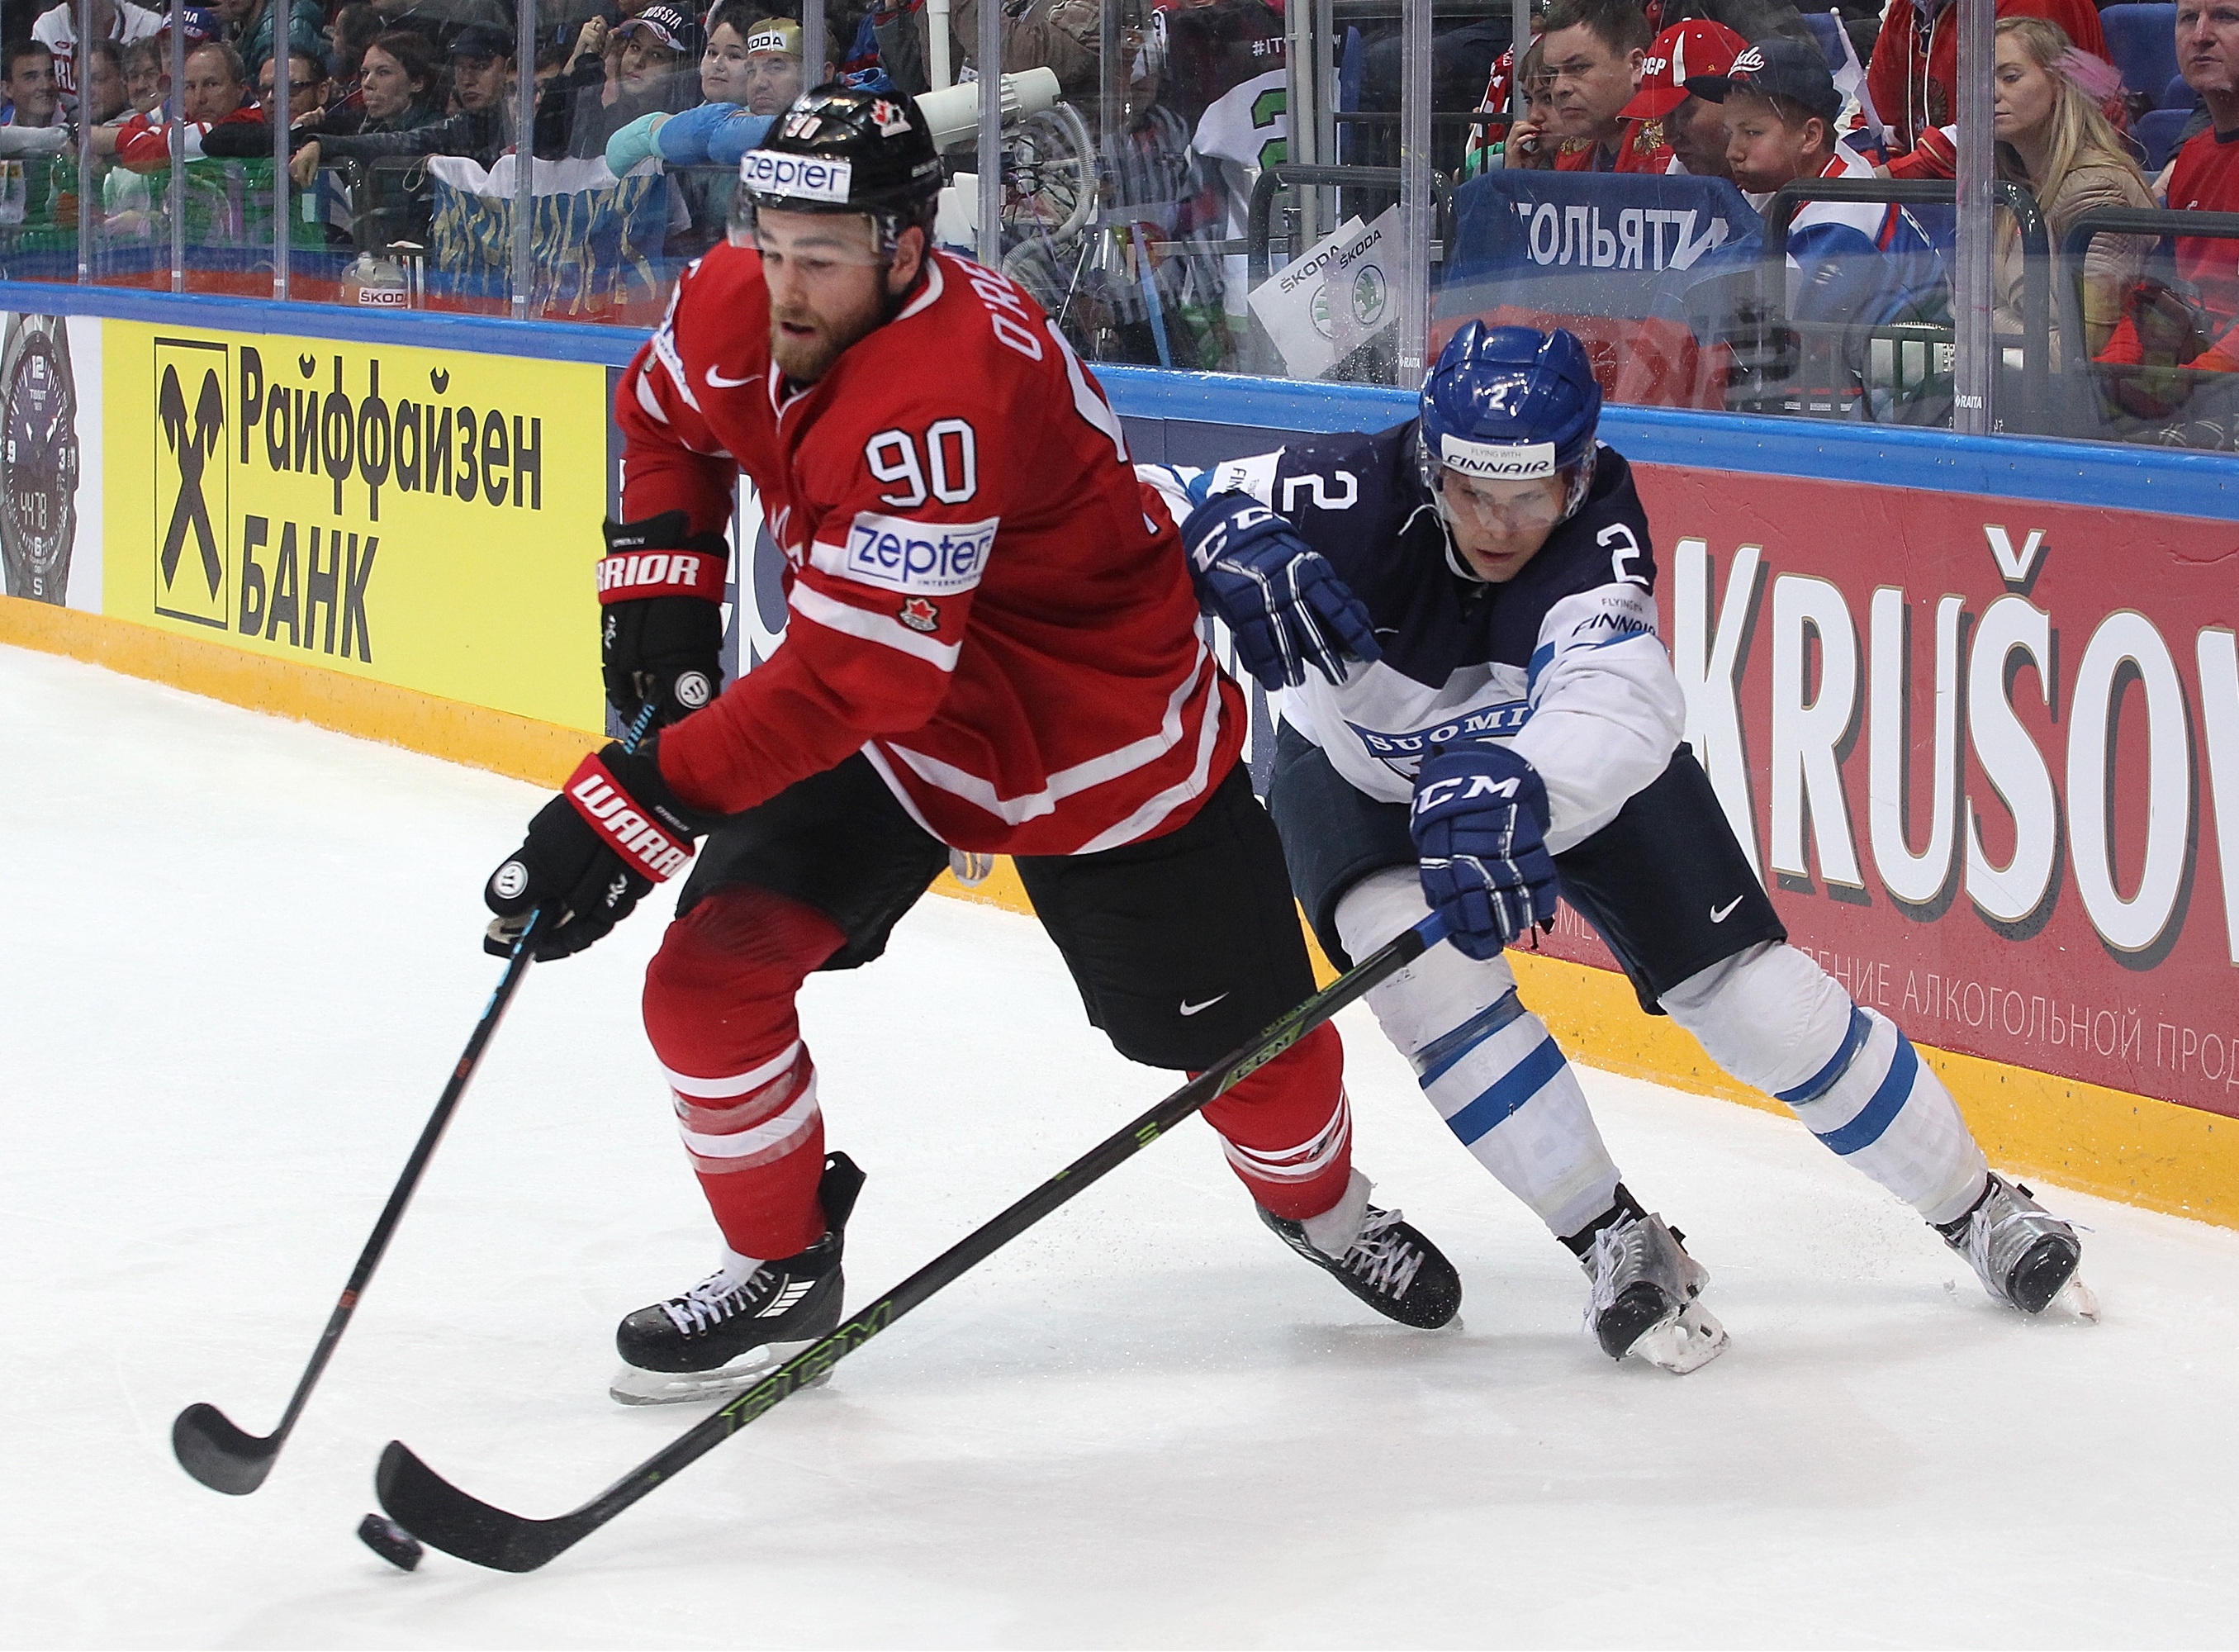 TVP expands ice hockey portfolio with NHL, World Cup rights SportBusiness Media